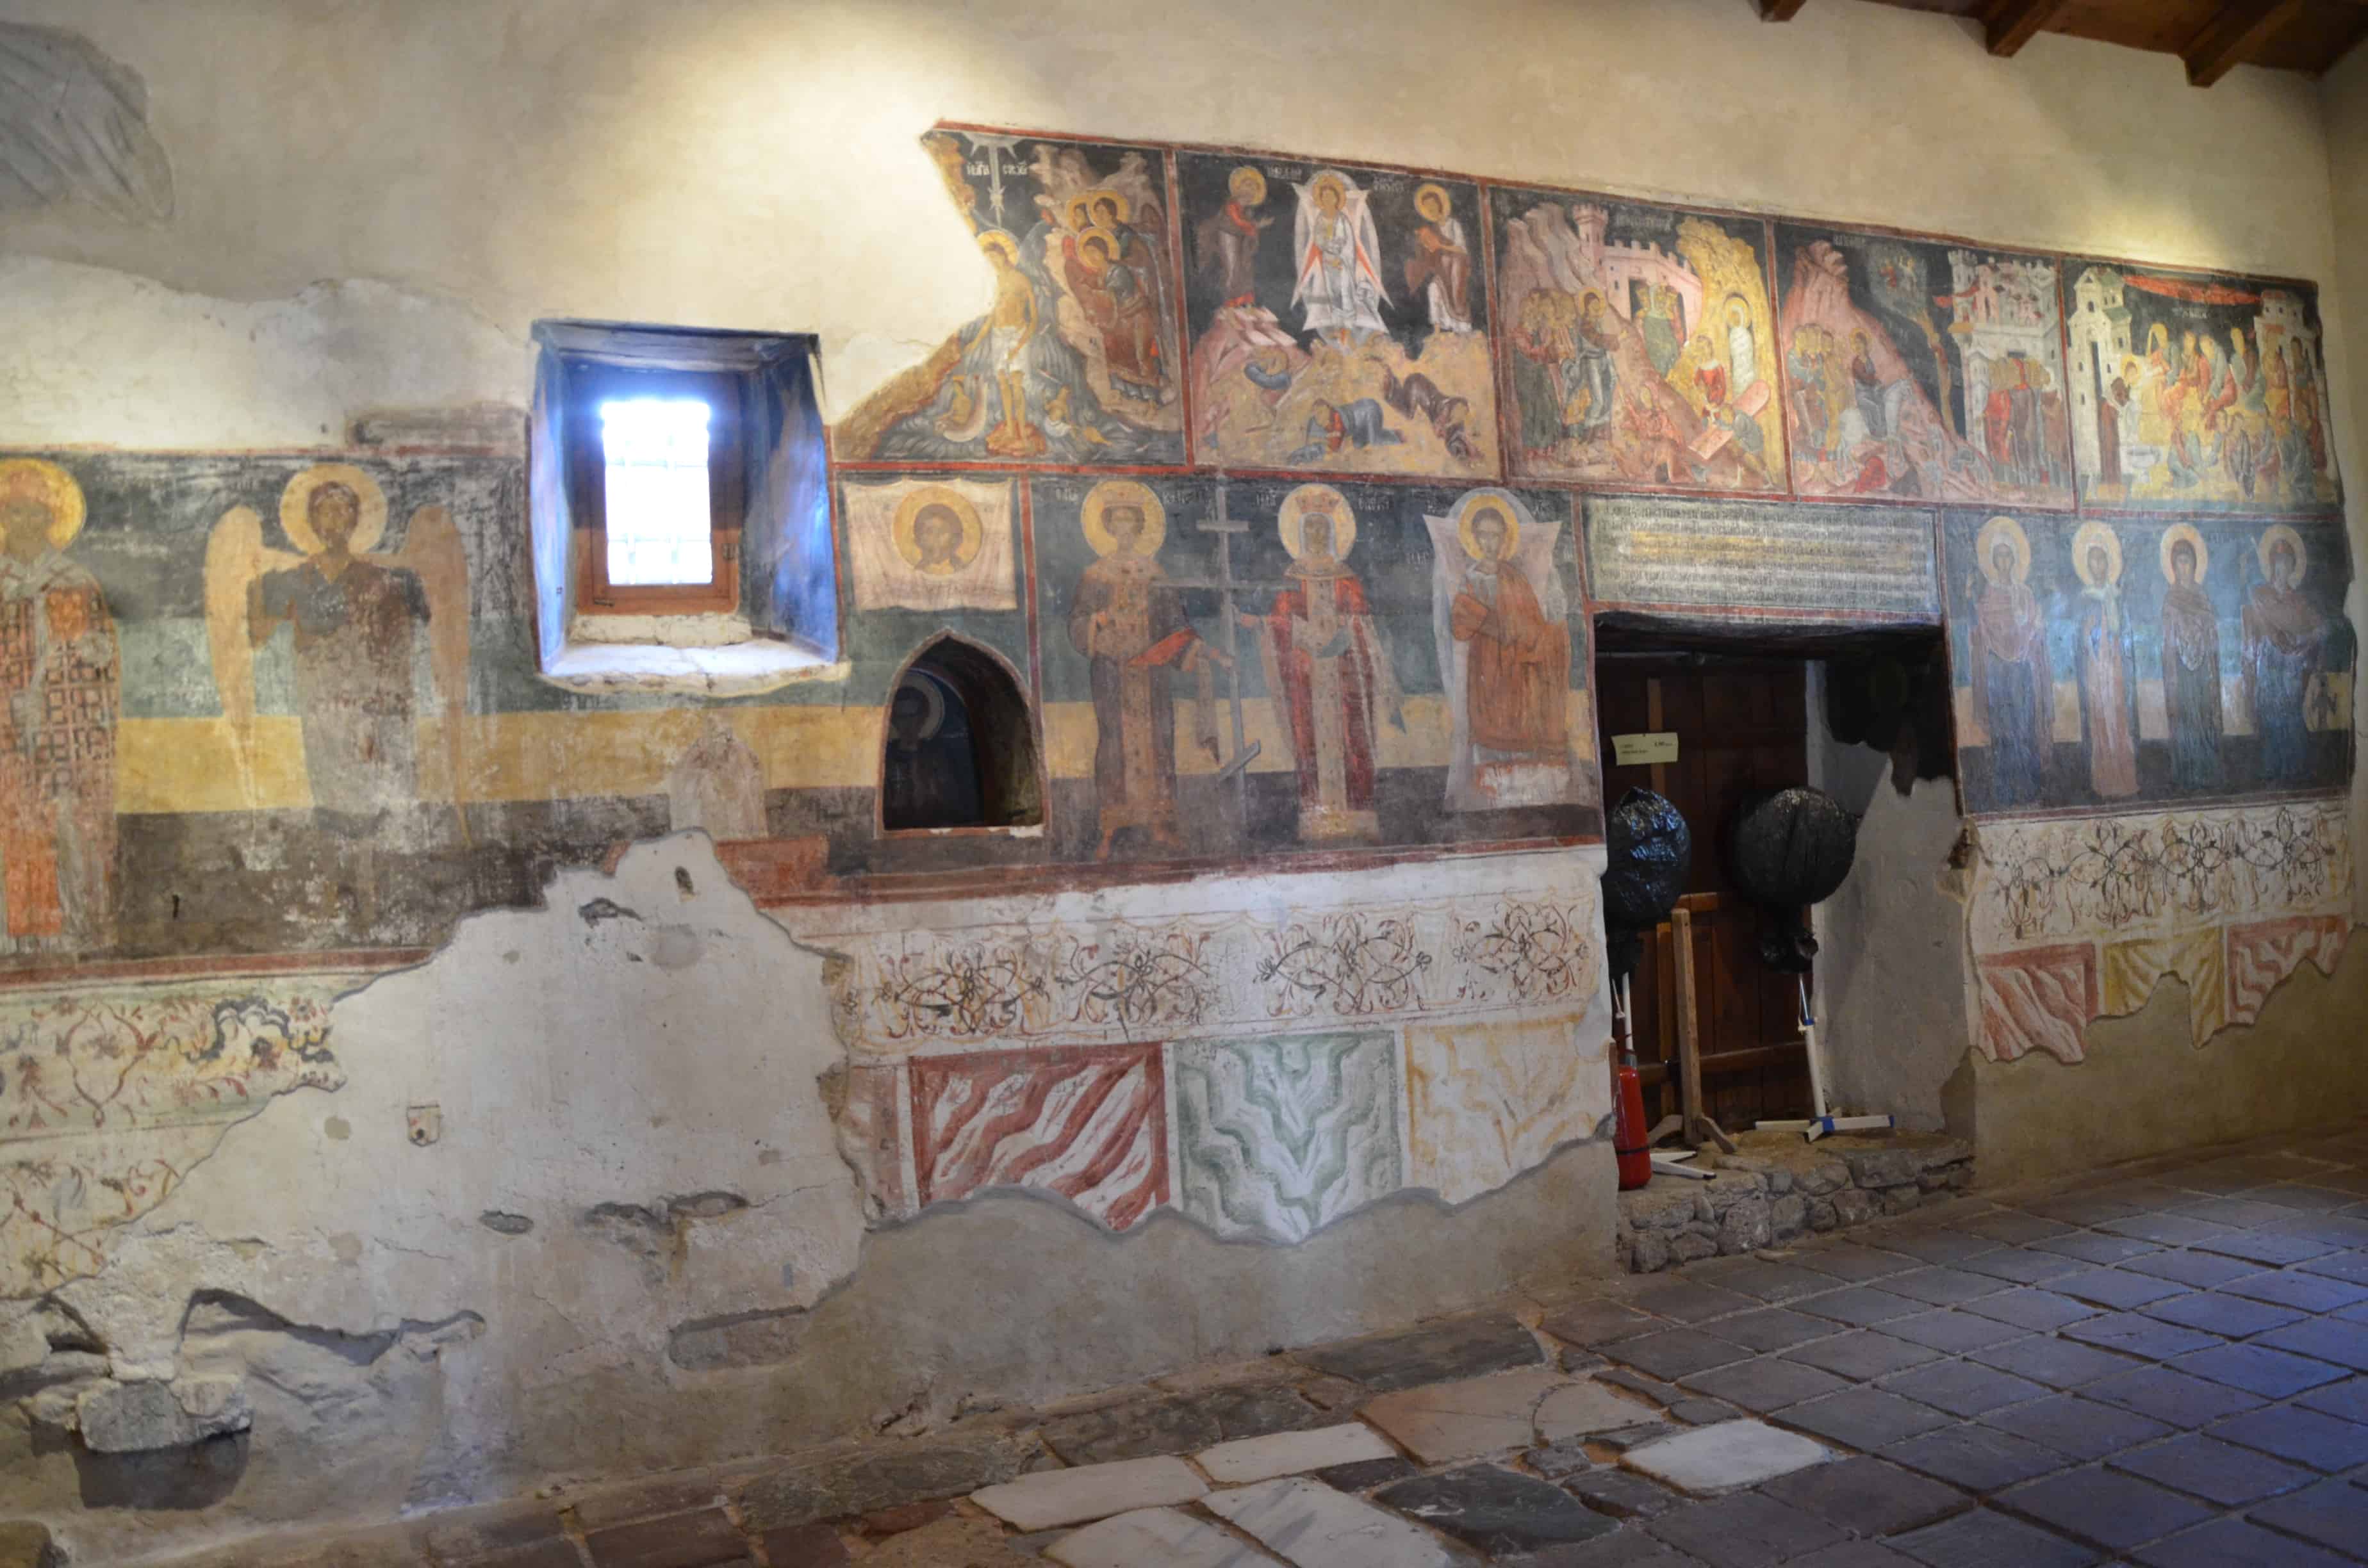 A wall containing frescoes in the Church of the Holy Saviour in Nessebar, Bulgaria